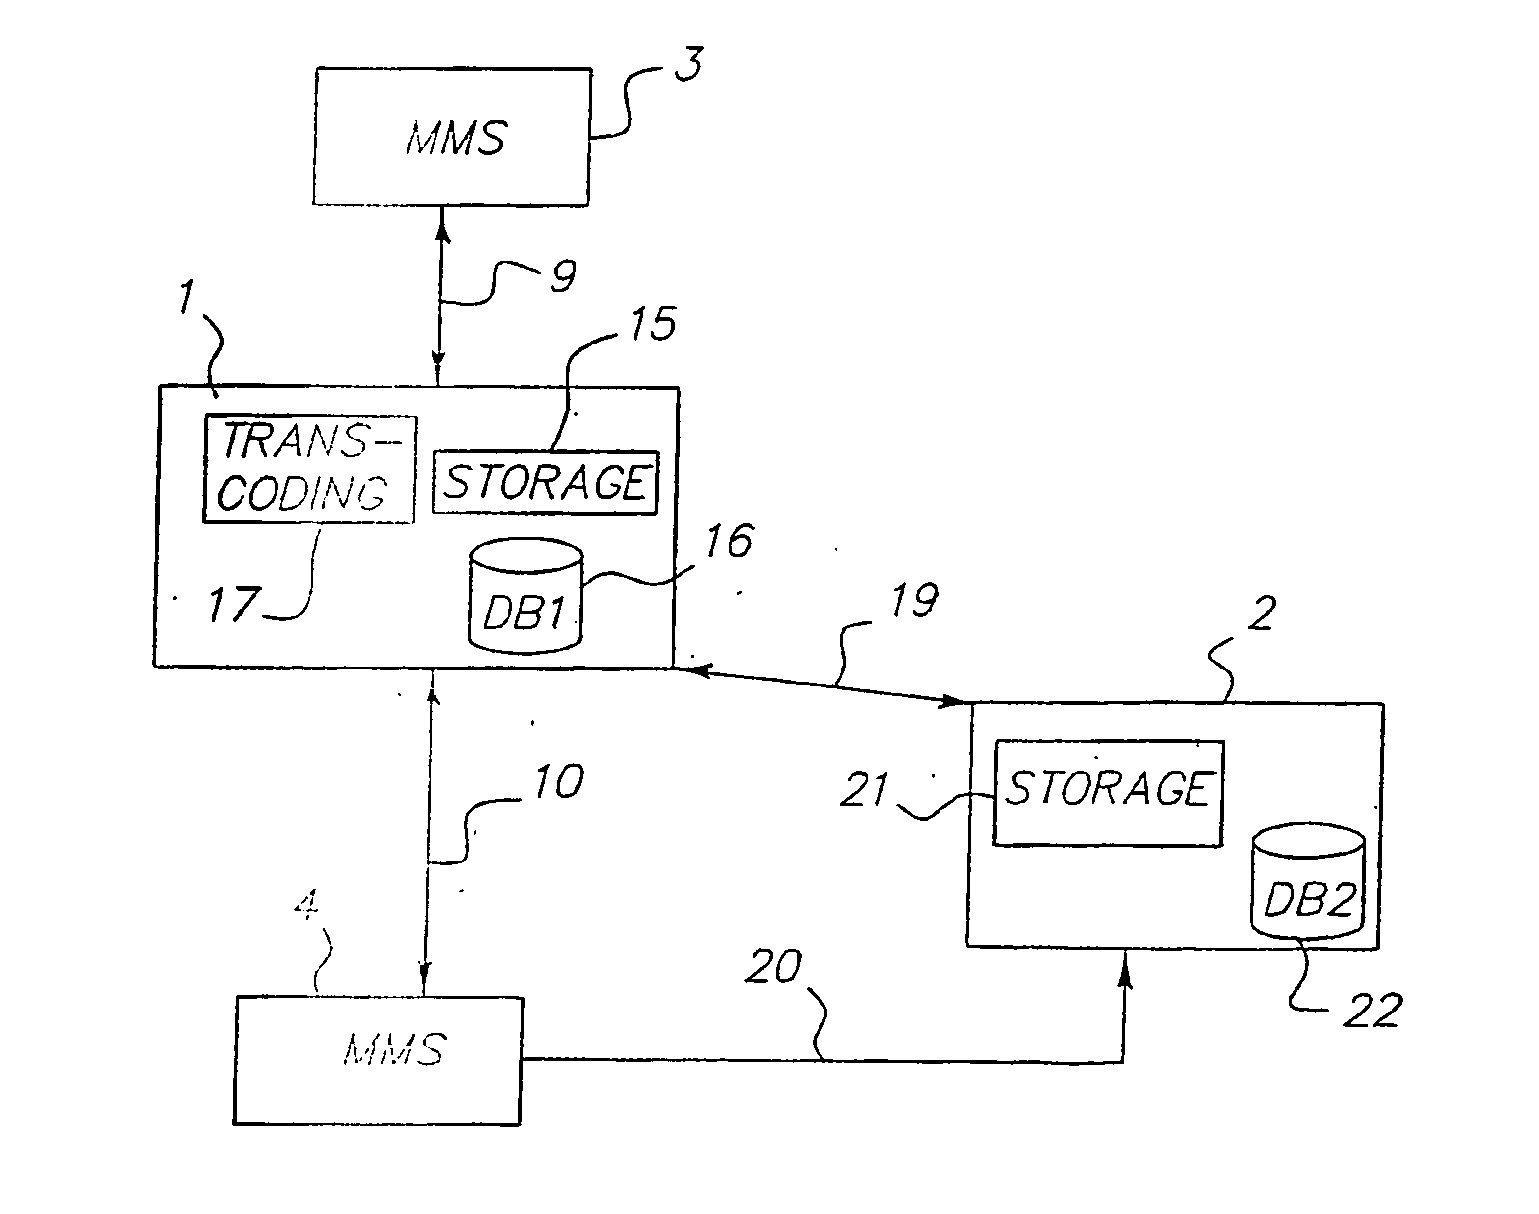 Method for archiving multimedia messages